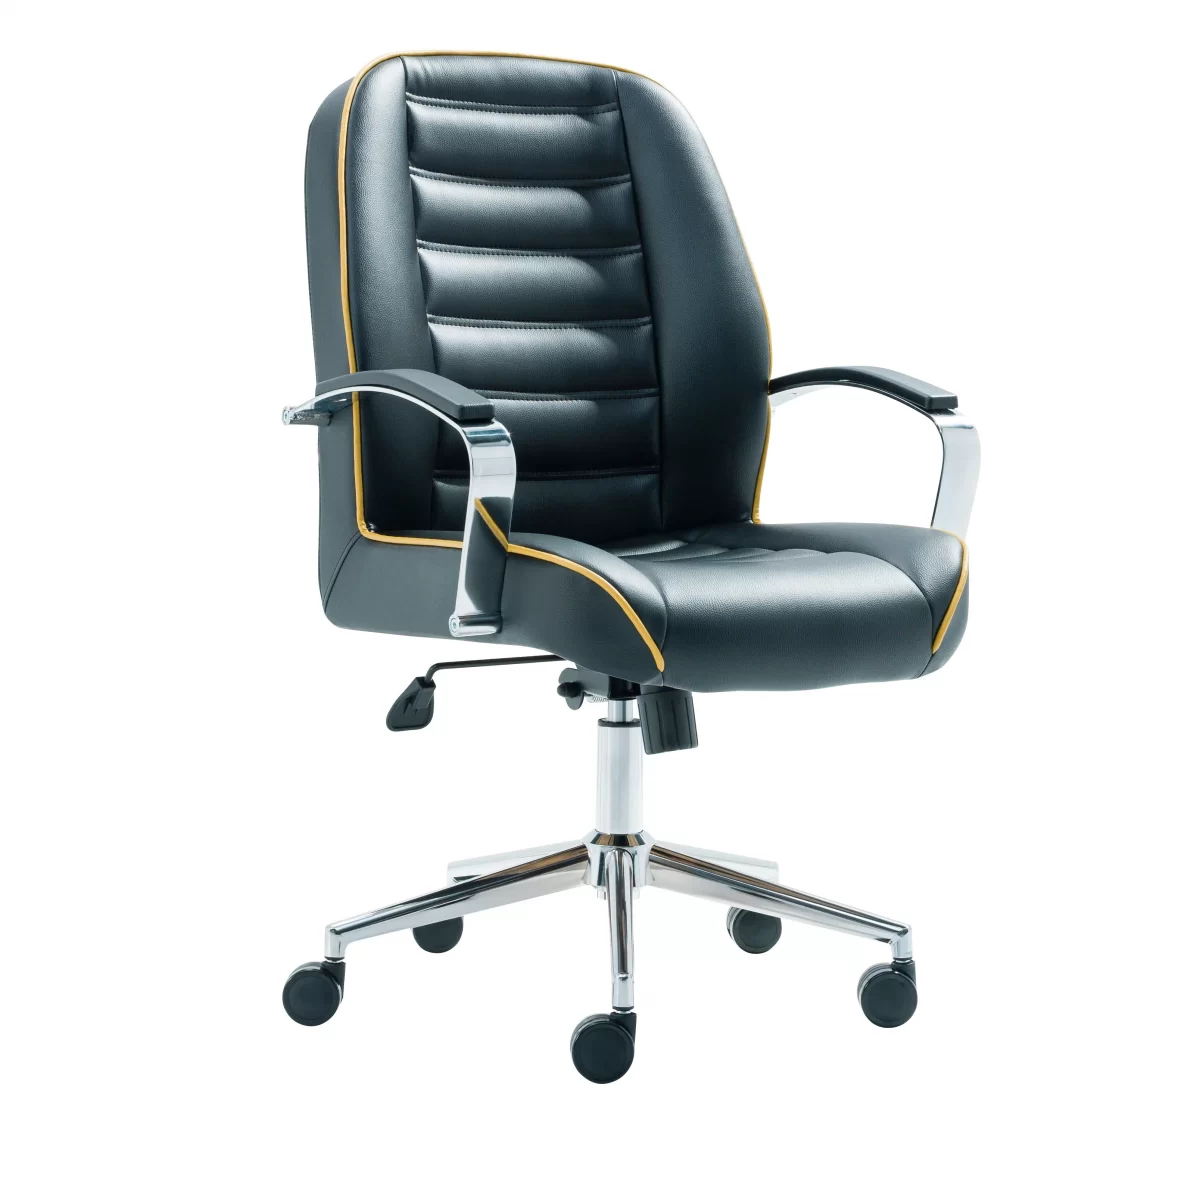 Karina Manager Office Chair Modern Office Chairs Turkey 2 scaled